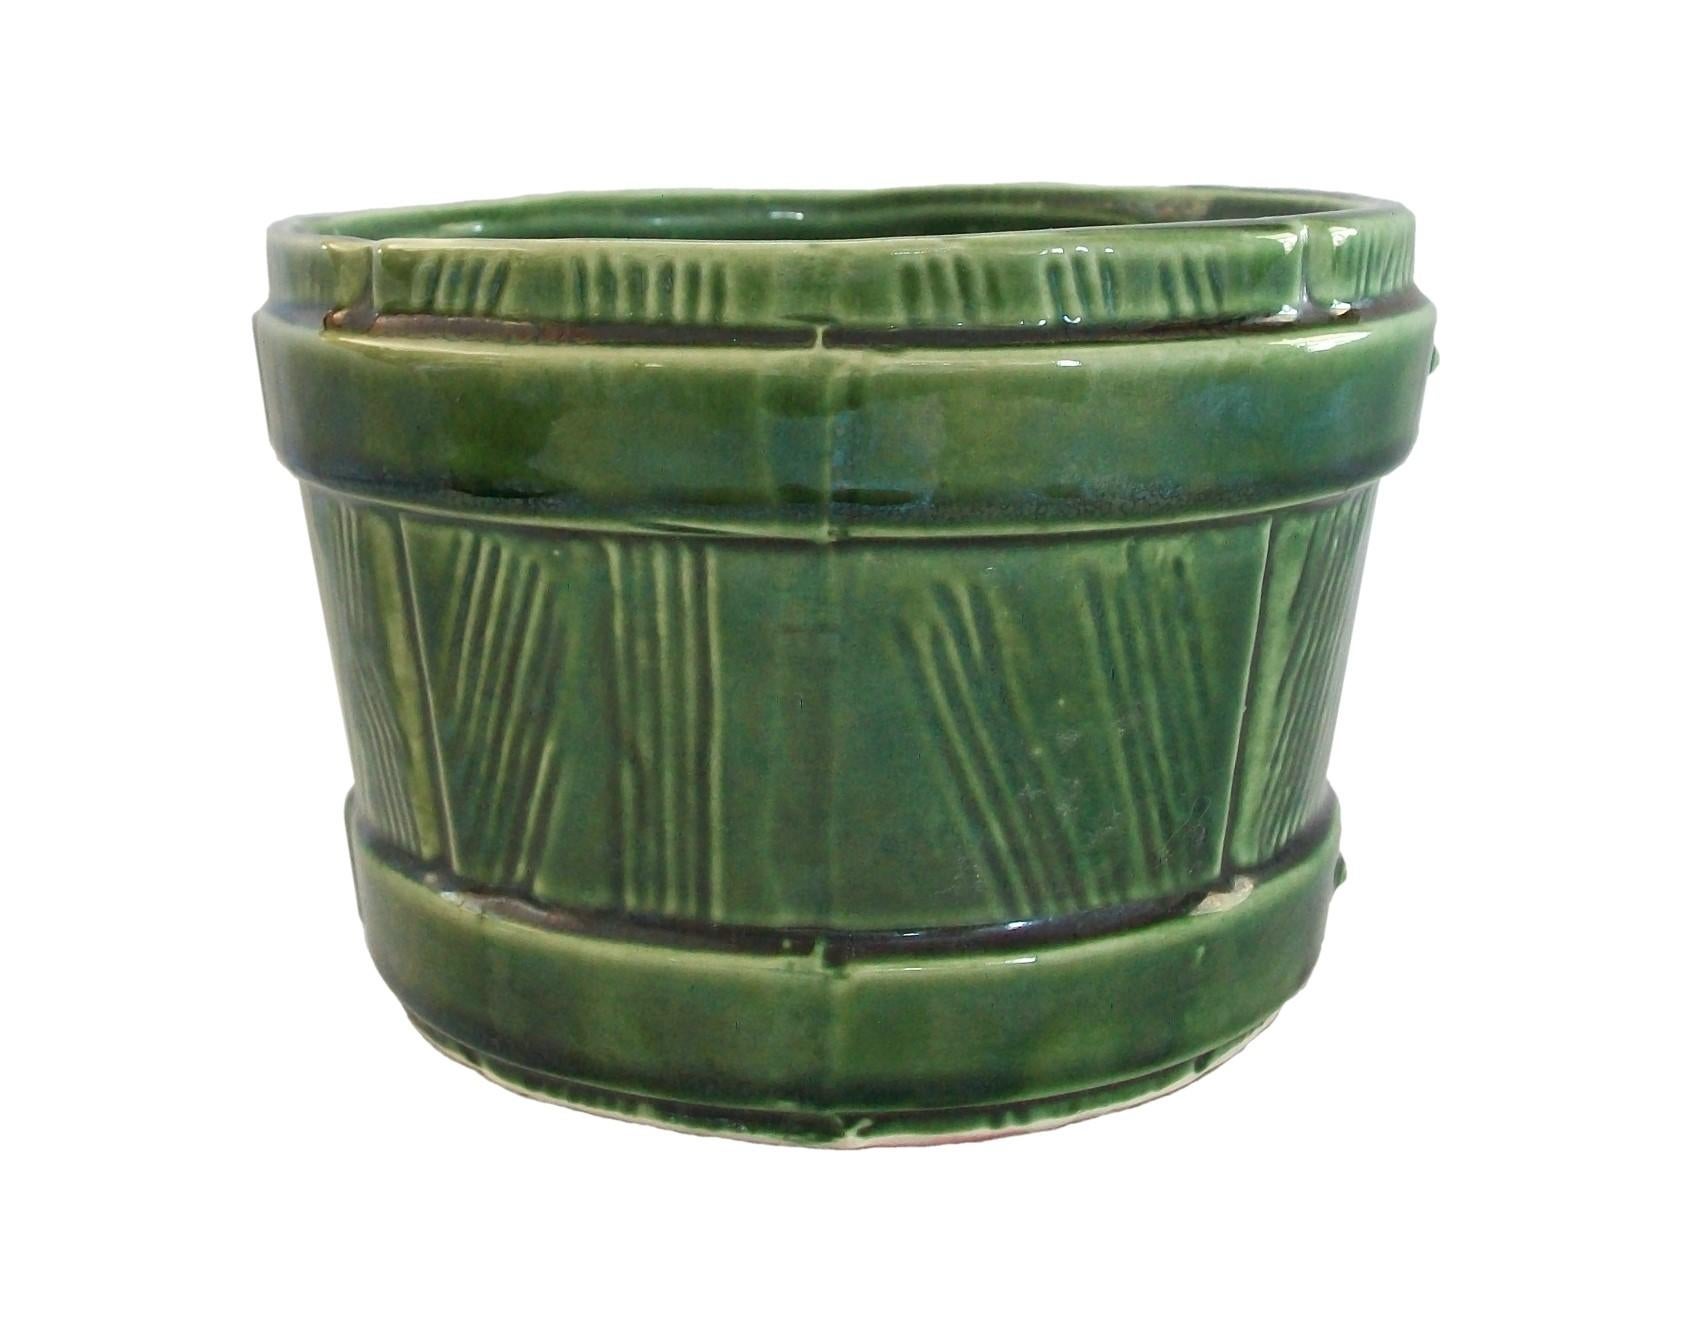 UNGEMACH POTTERY COMPANY (UPCO) - Vintage ceramic 'faux bois' planter - molded decoration - green glaze throughout - signed on the base - United States - circa 1950's.

Excellent vintage condition - no loss - no damage - no restoration - minor